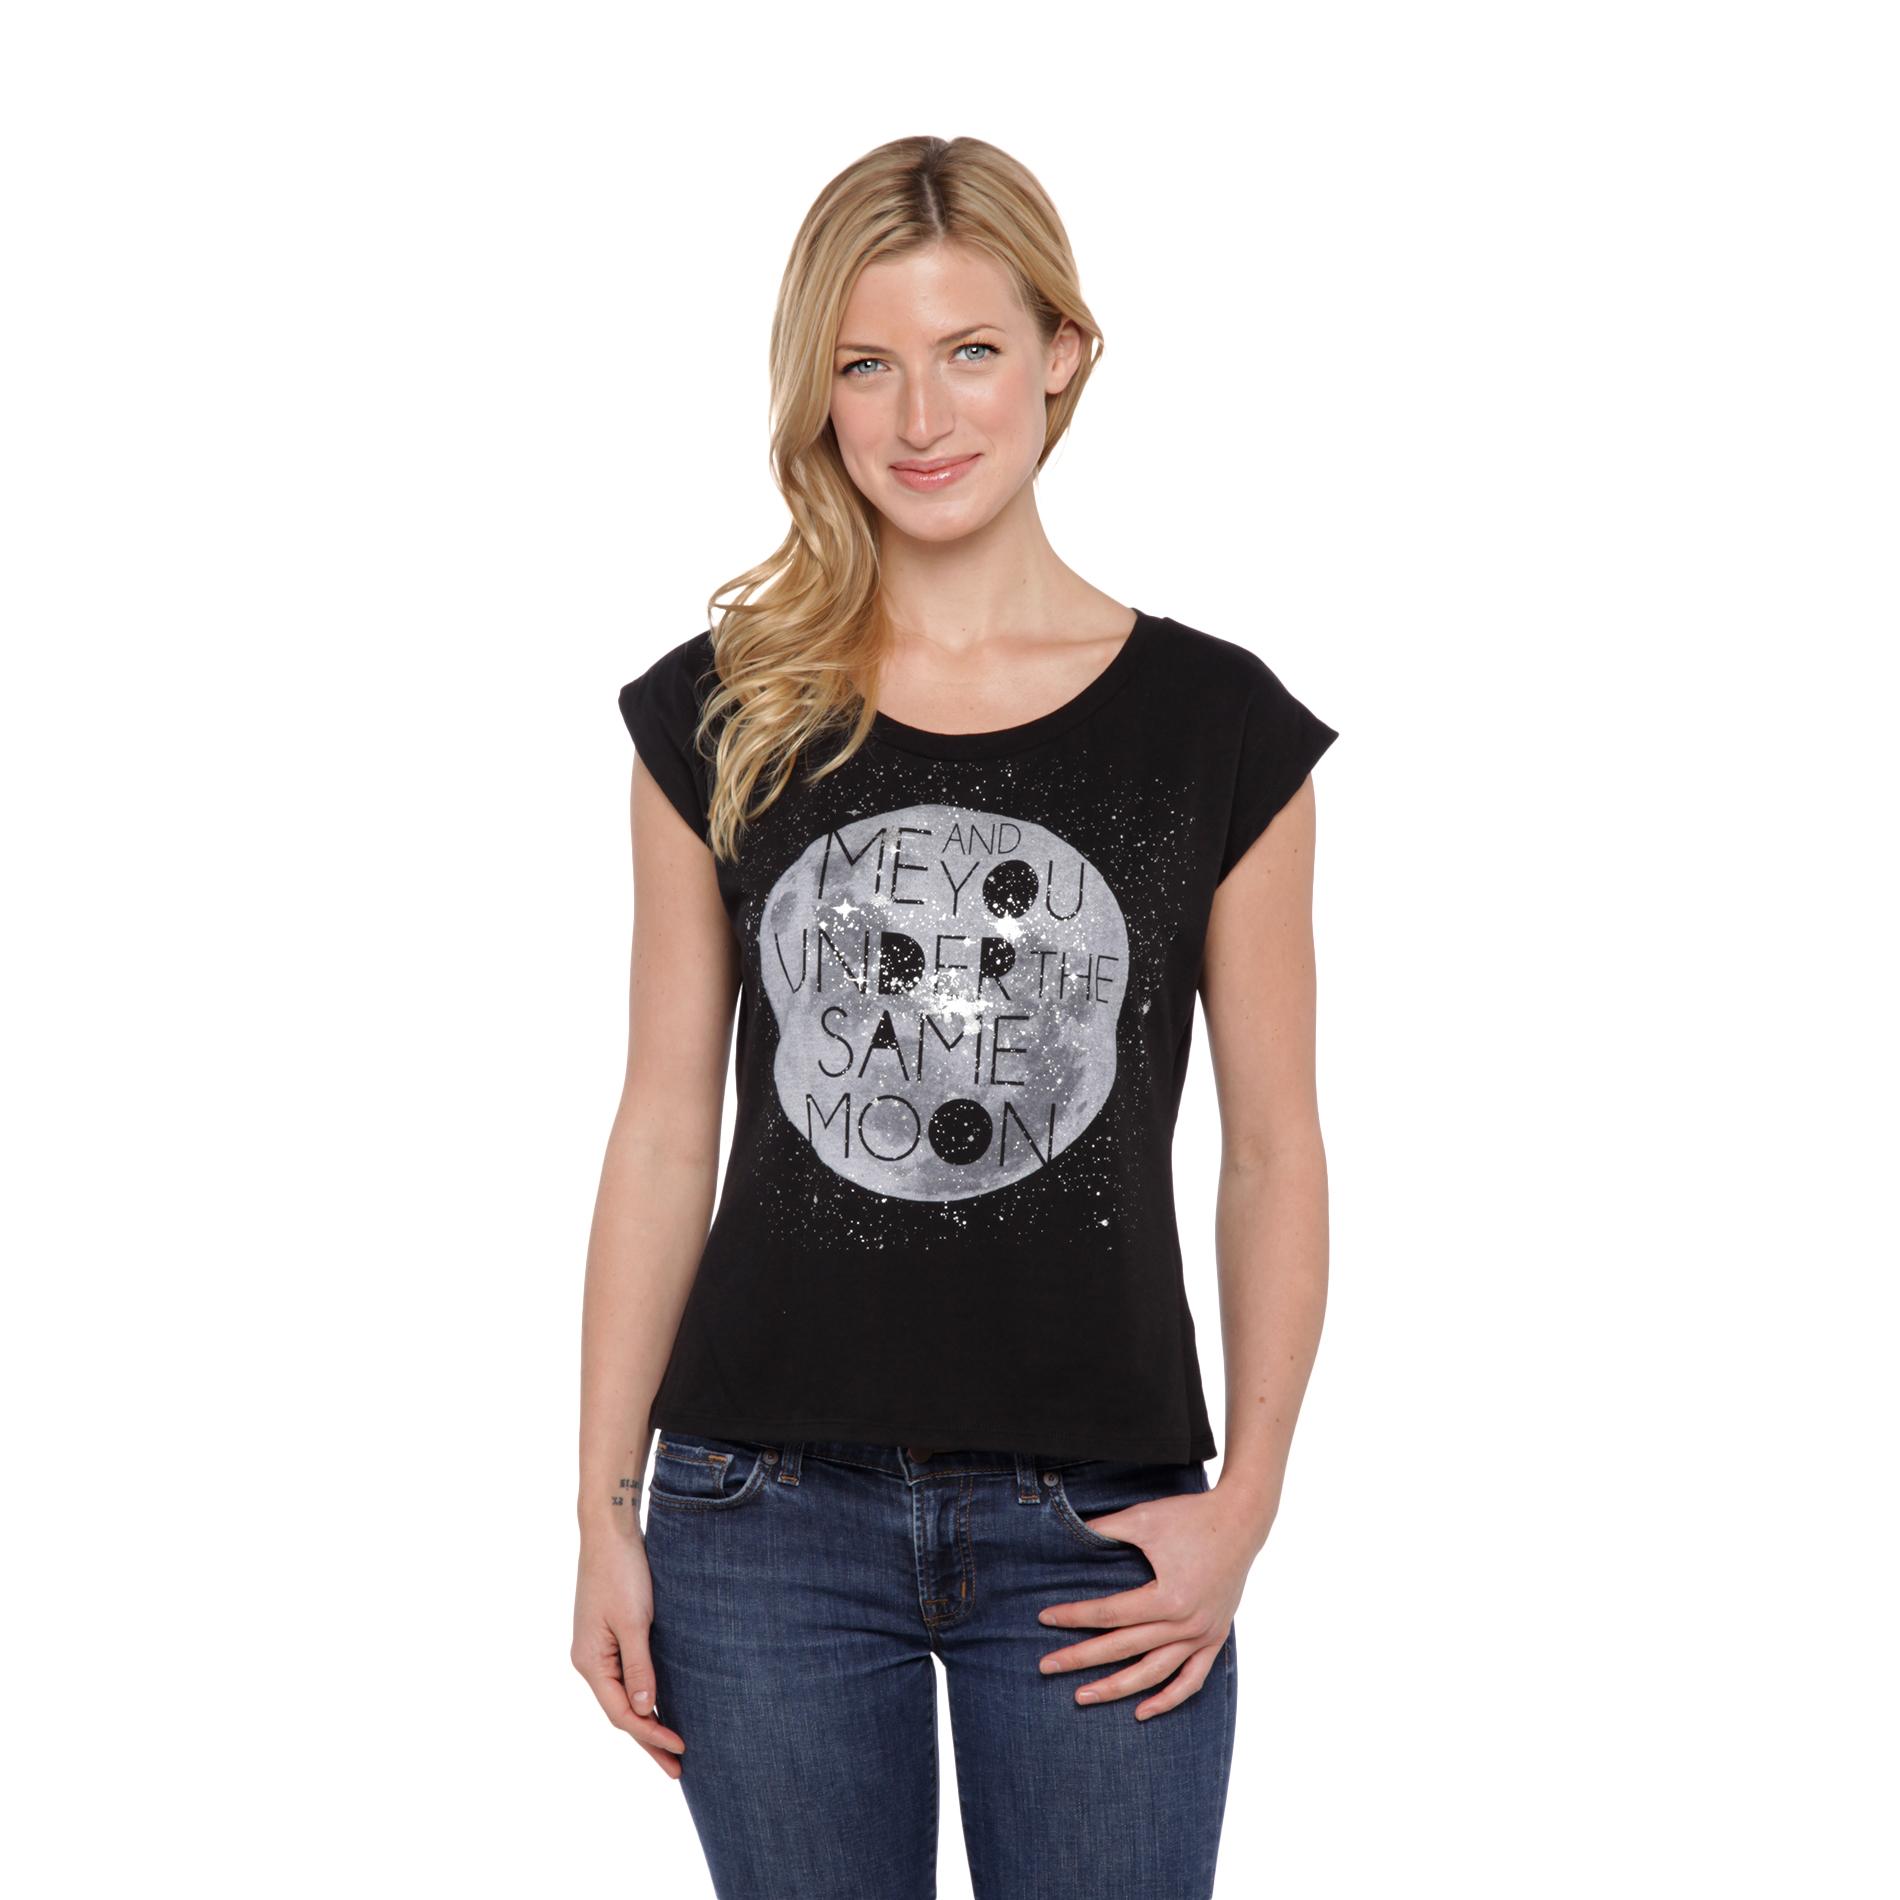 Route 66 Women's Graphic Top - The Same Moon